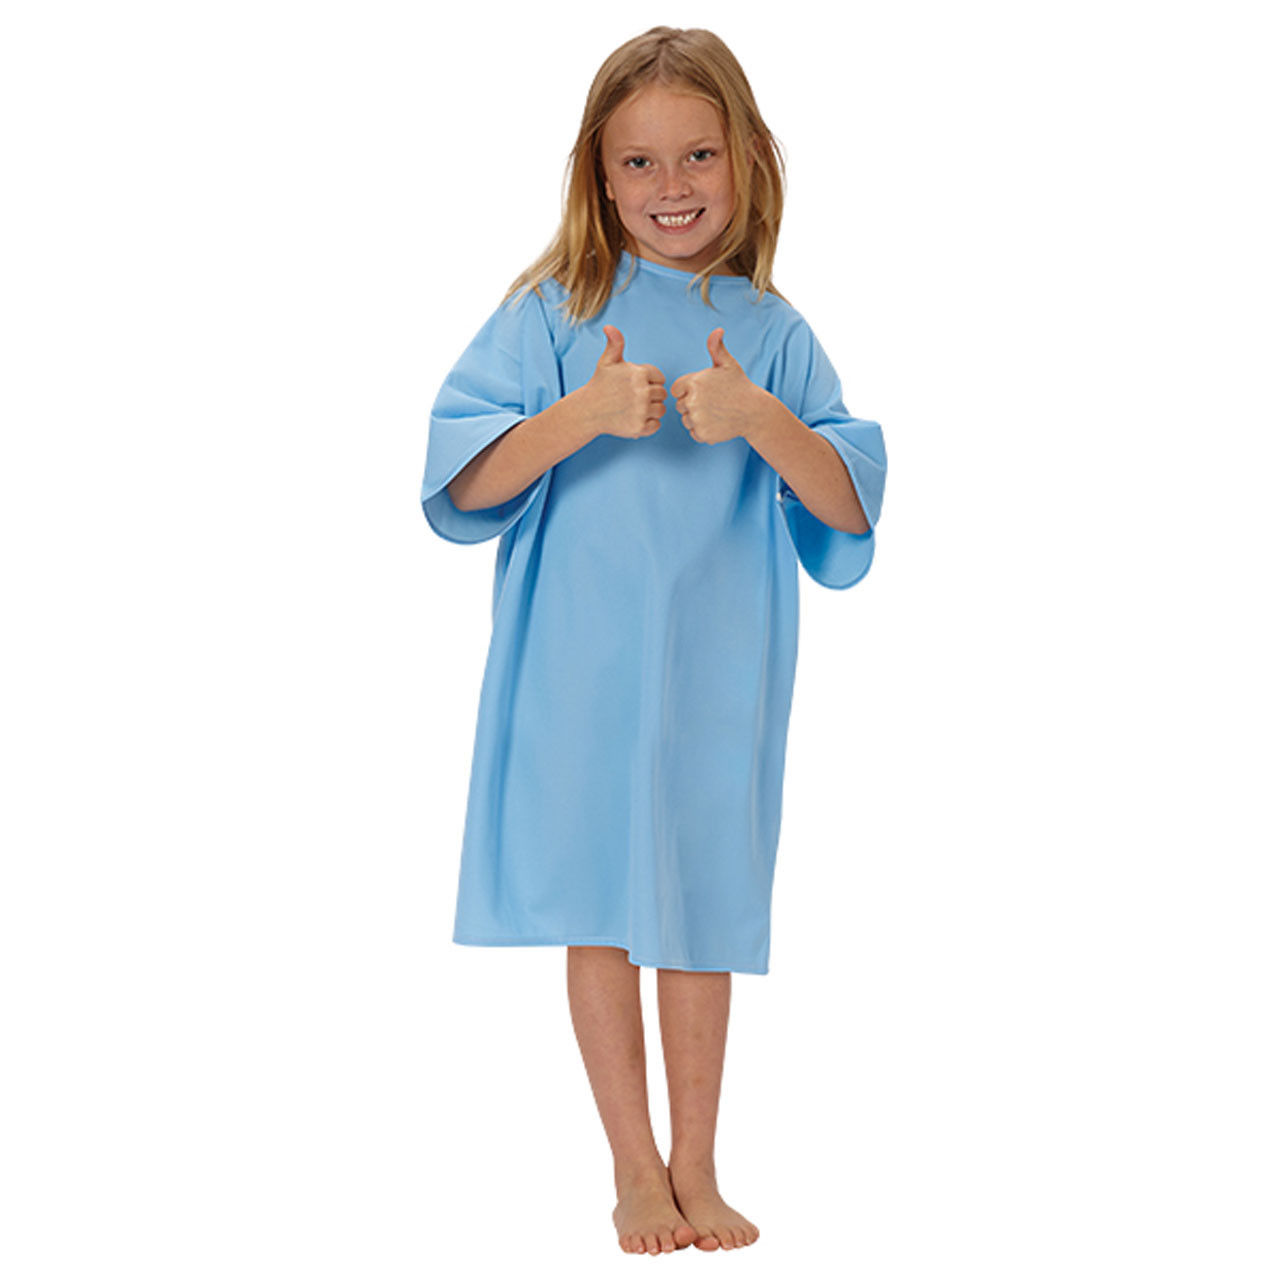 How many blue medical gowns for pediatric use are in each package?